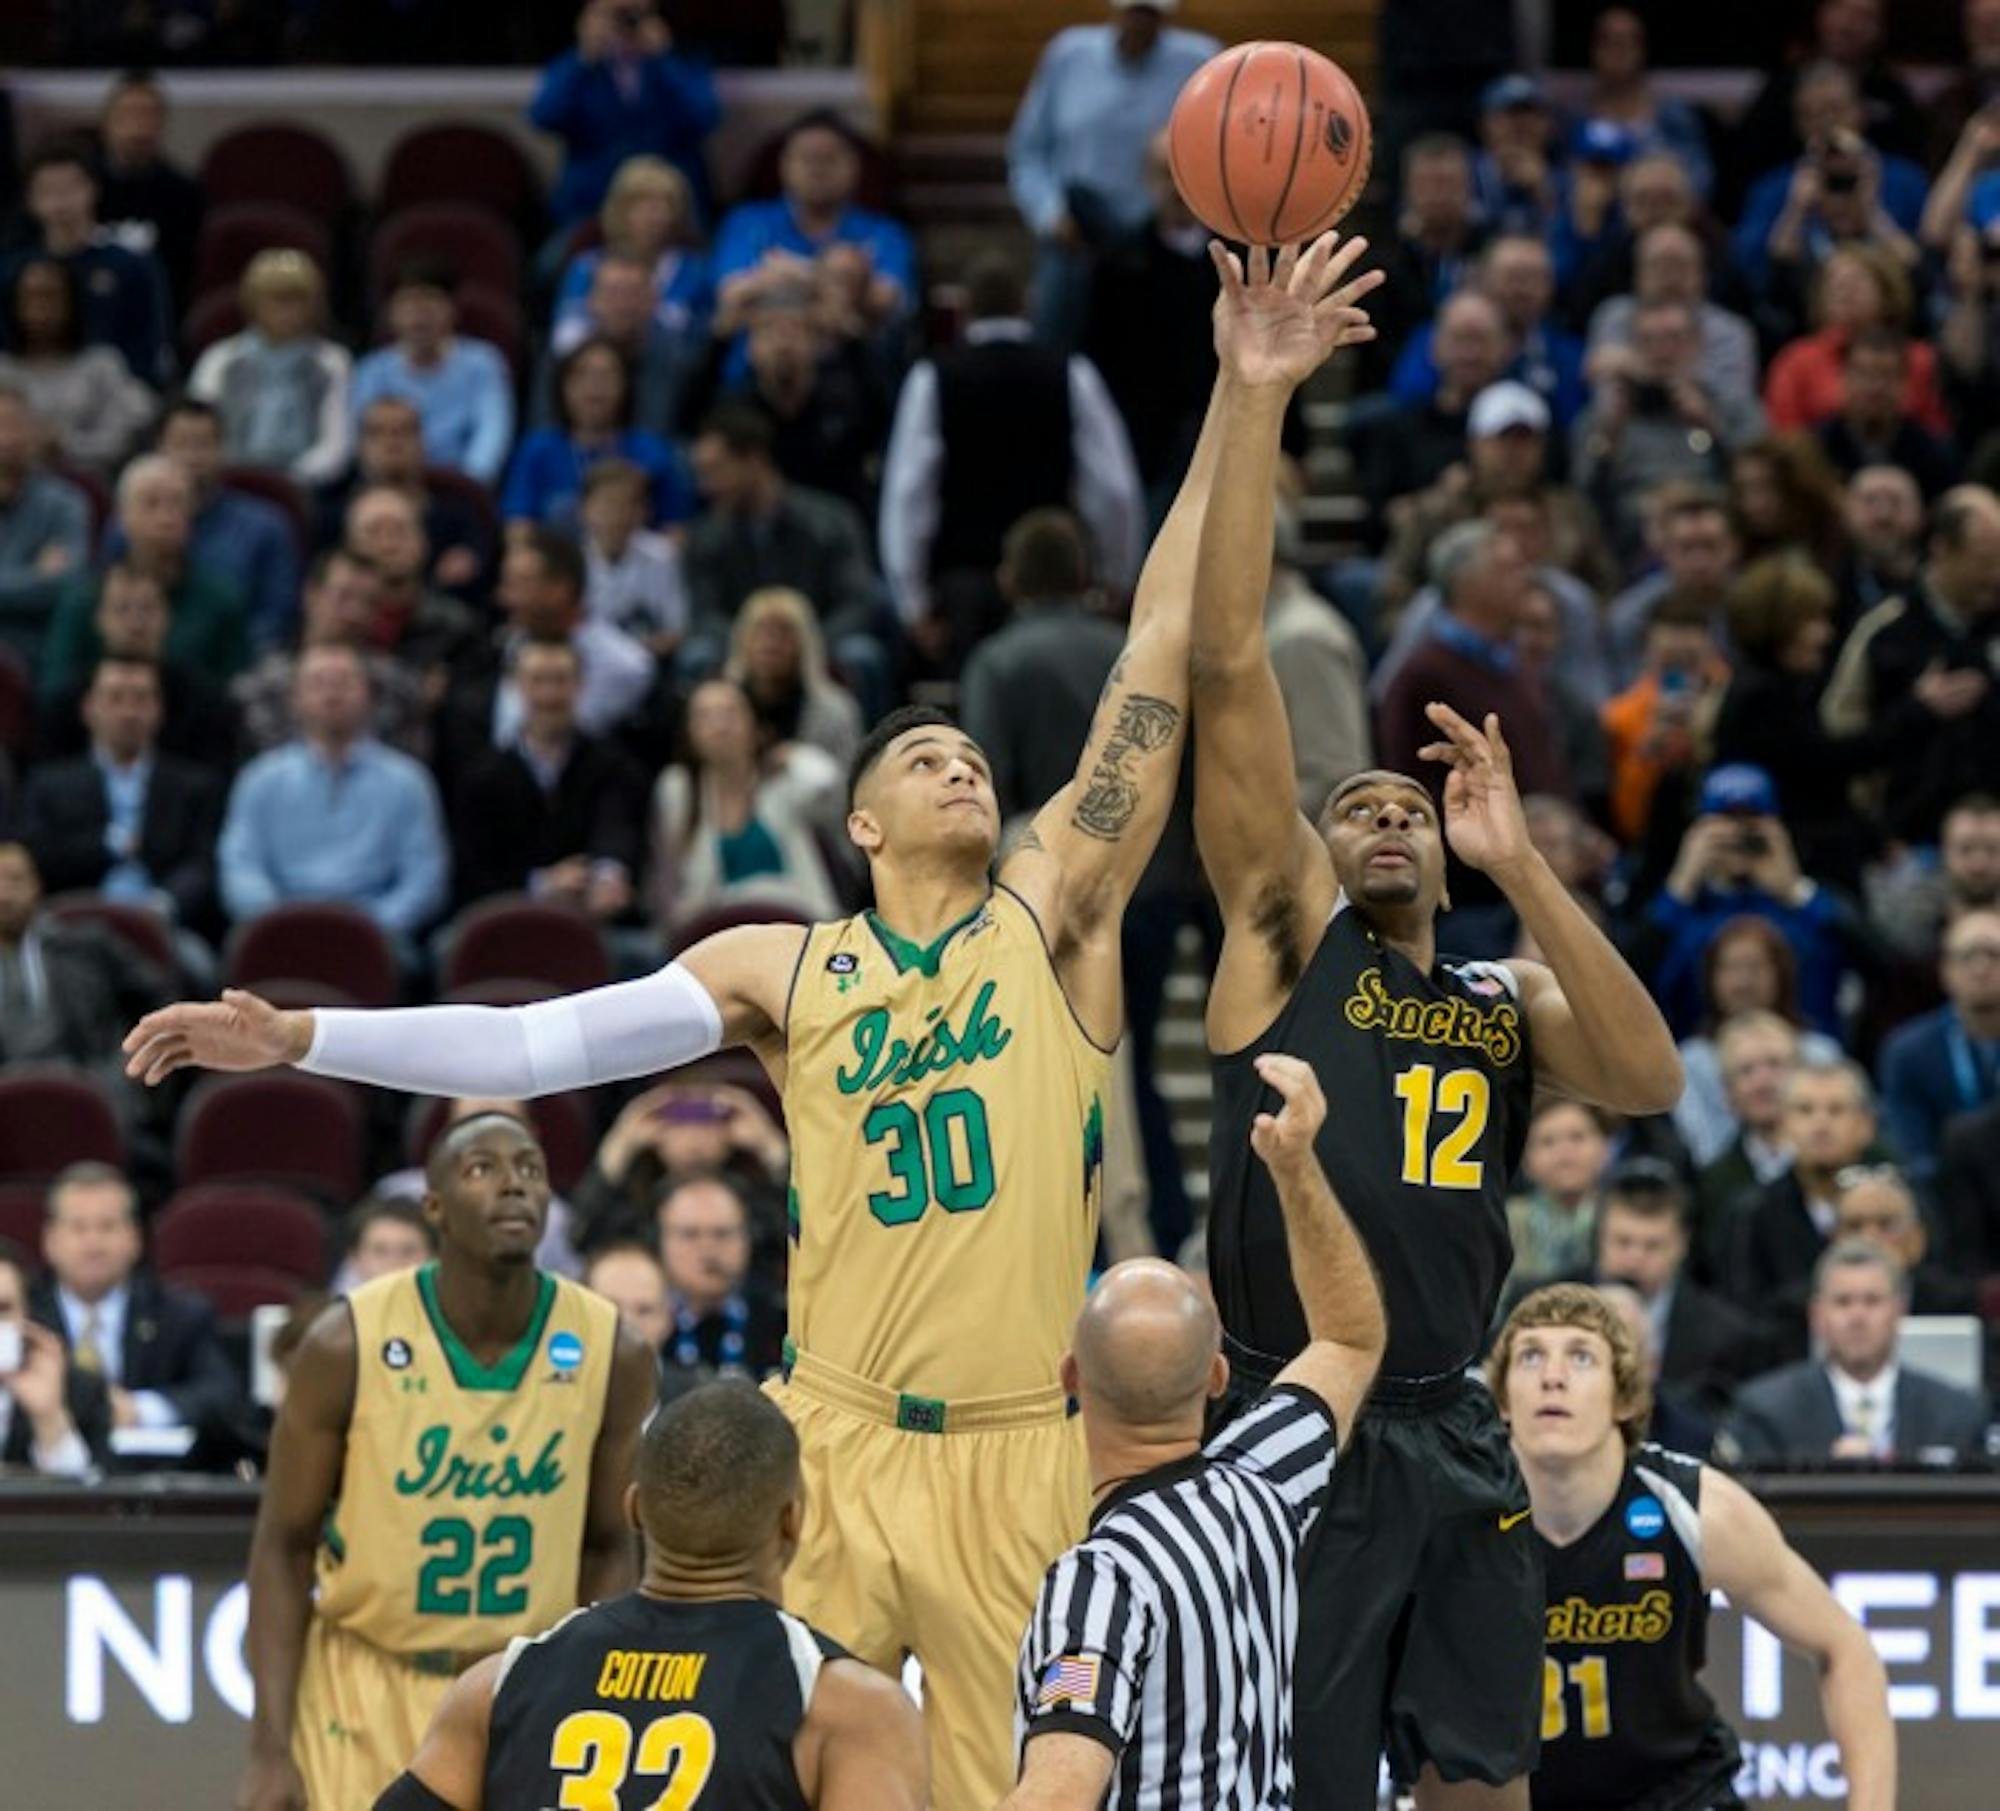 Irish senior forward Zach Auguste reaches for the tip-off at the start of a 81-70 victory against Wichita State on March 26 in Cleveland, OH.  Auguste had 15 points and six rebounds in the game.